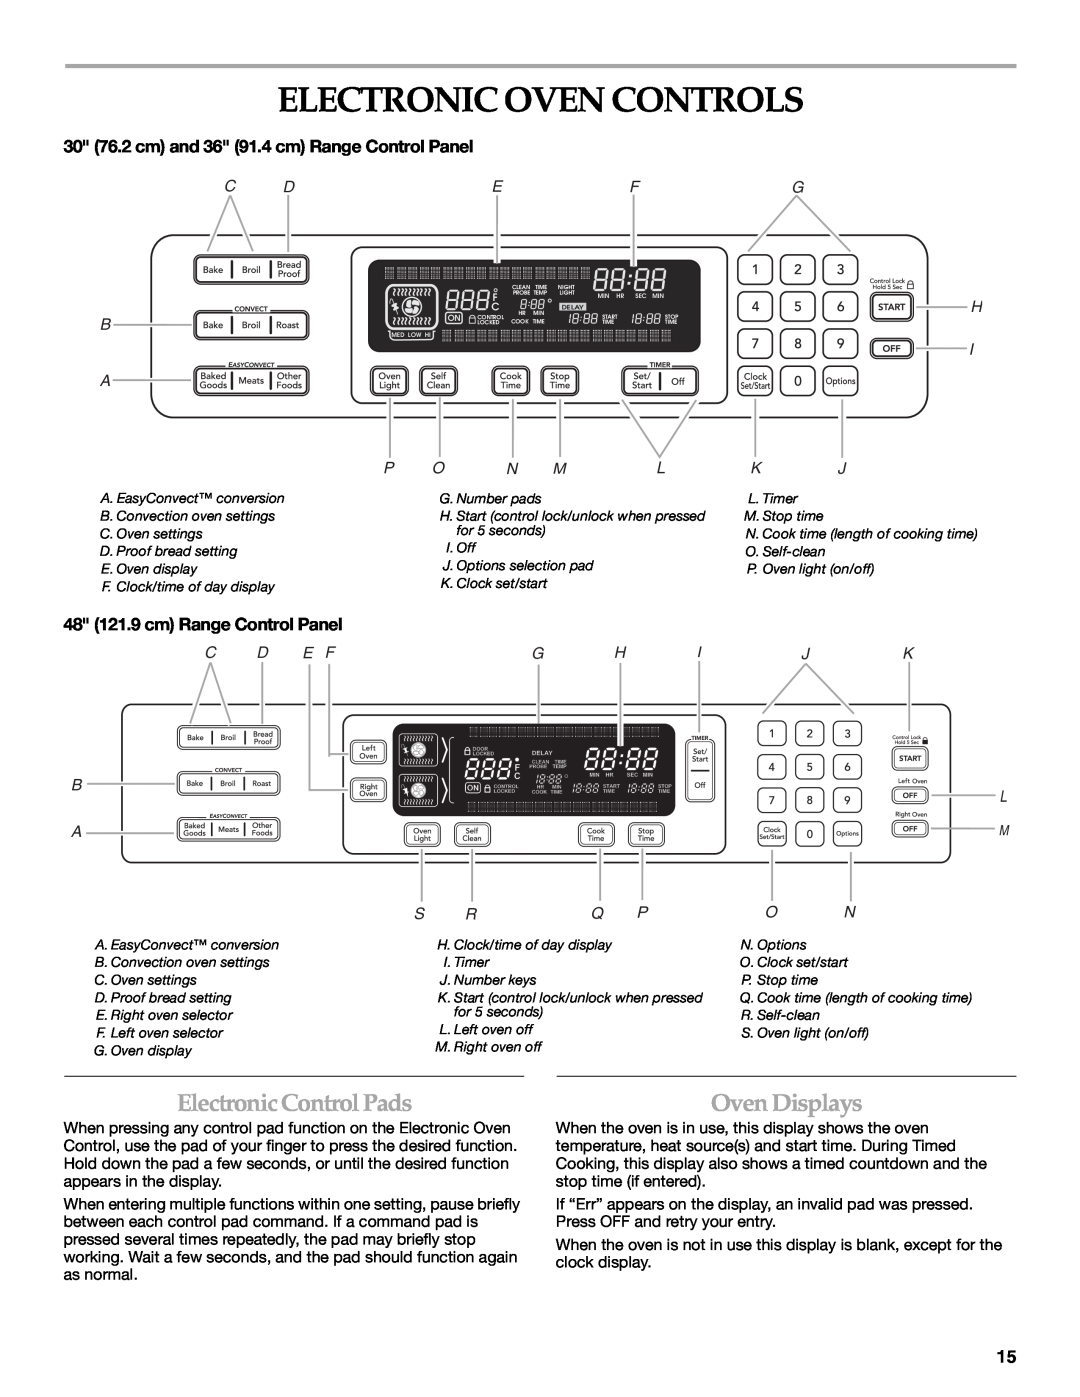 KitchenAid KDRS467 manual Electronic Oven Controls, Electronic Control Pads, Oven Displays, 48 121.9 cm Range Control Panel 